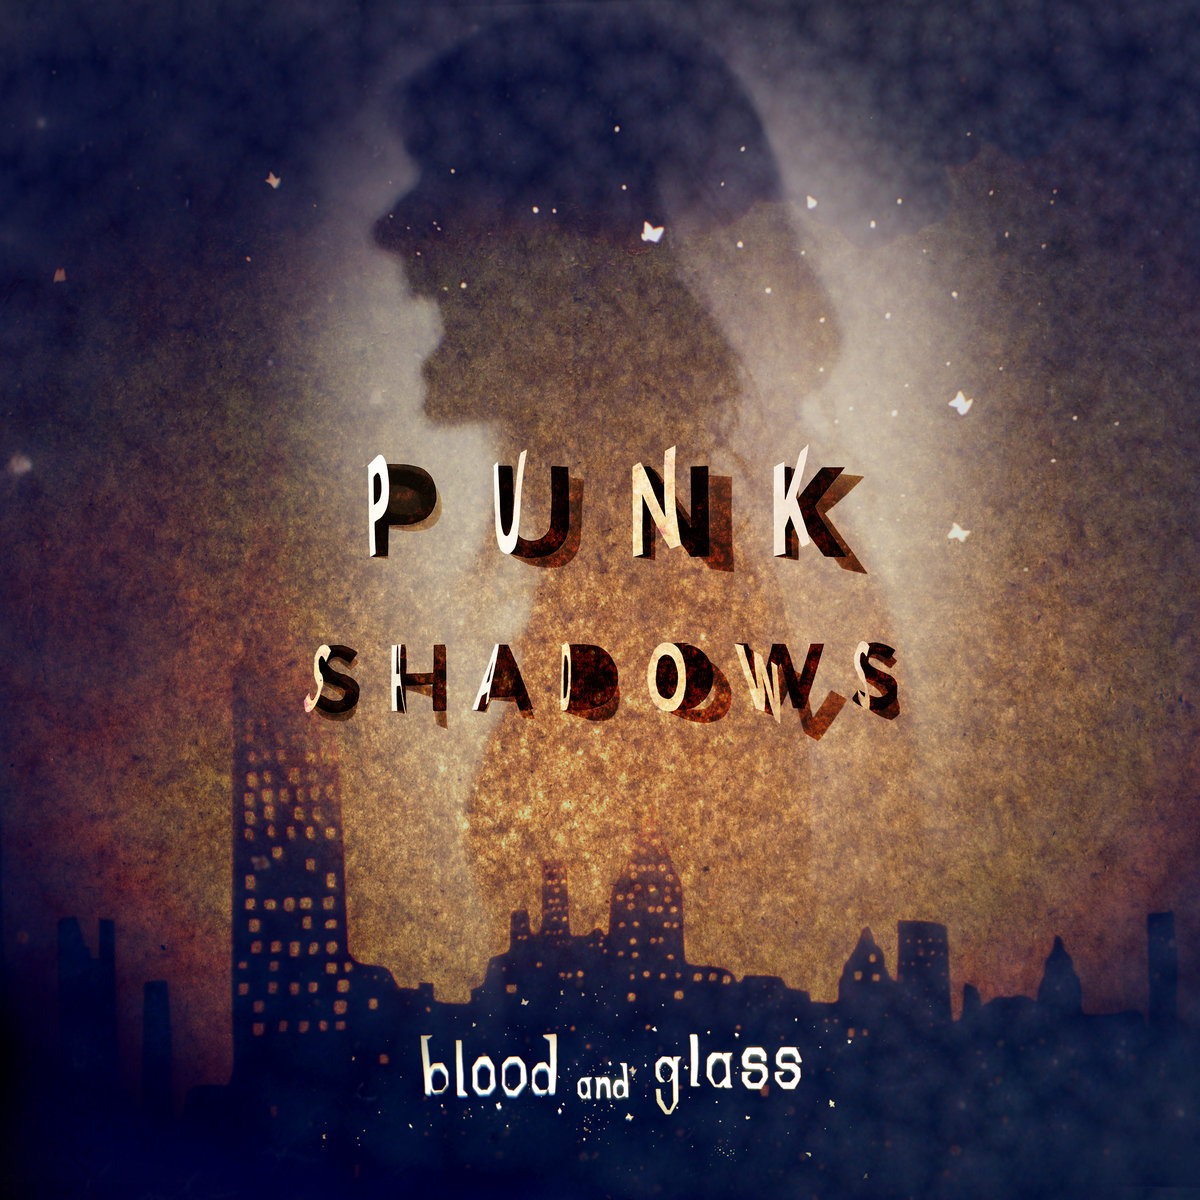 'Punk Shadows' by Blood and Glass, album review by Owen Maxwell